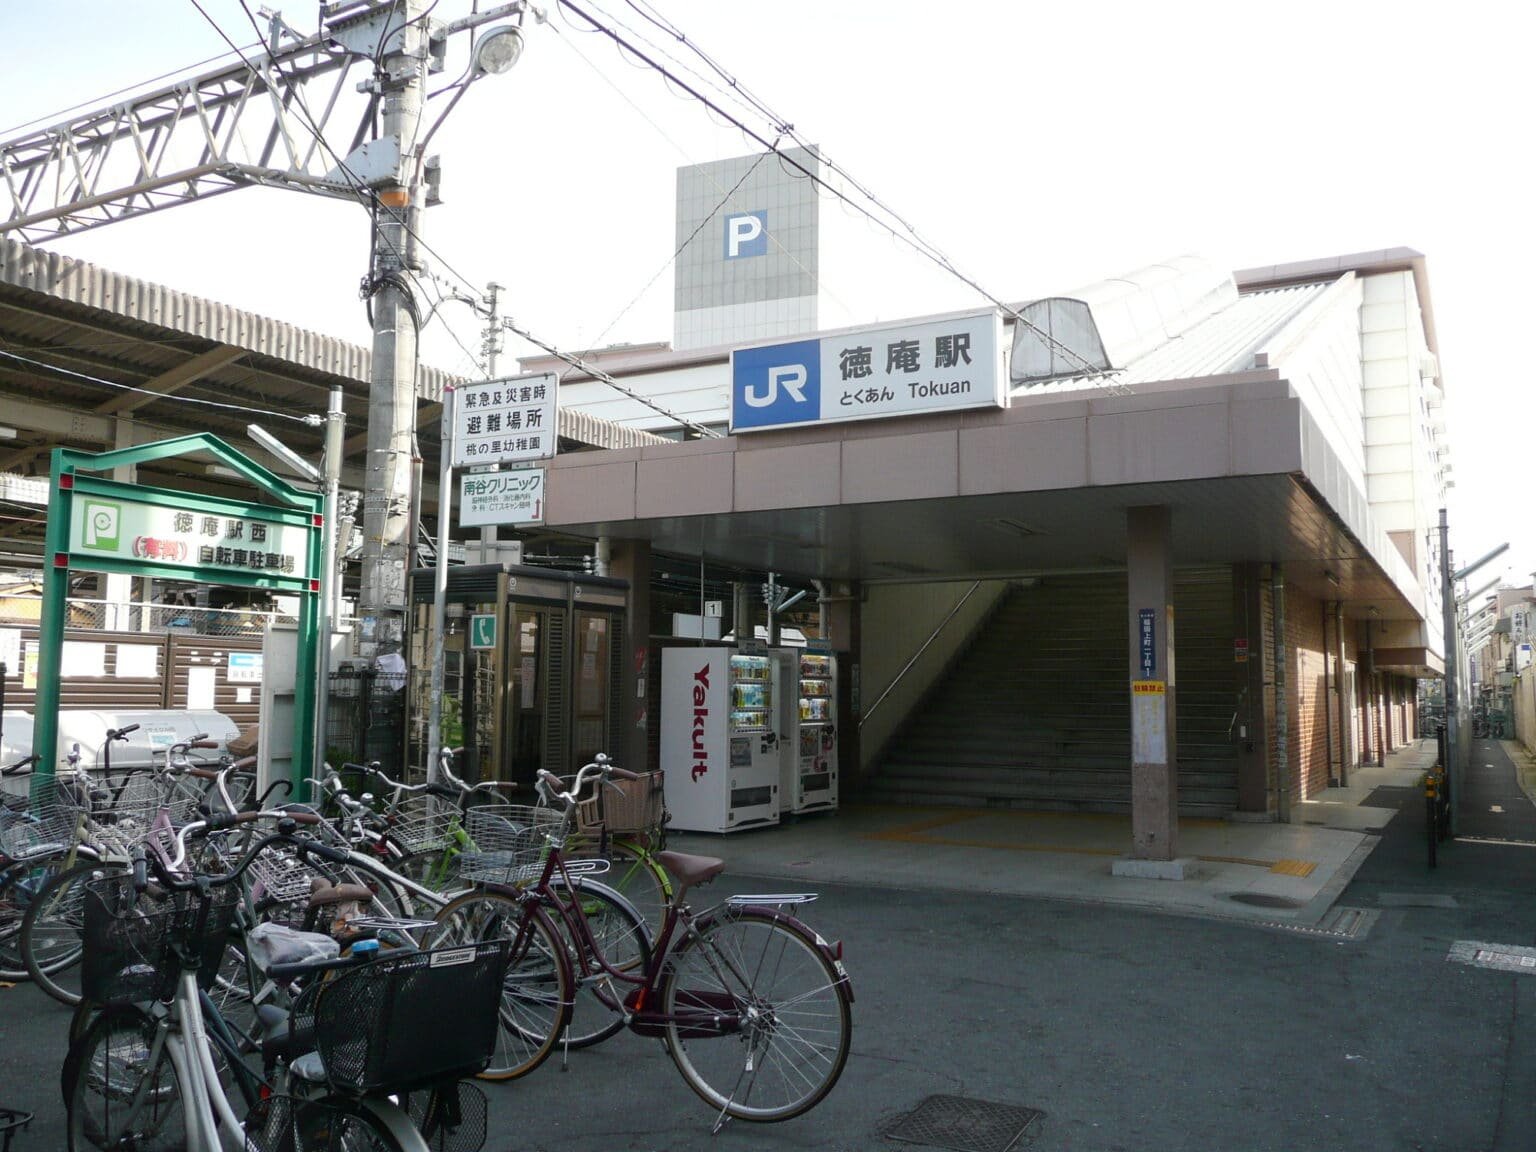 JR West-Katamachi Line: Where the Old Meets the New